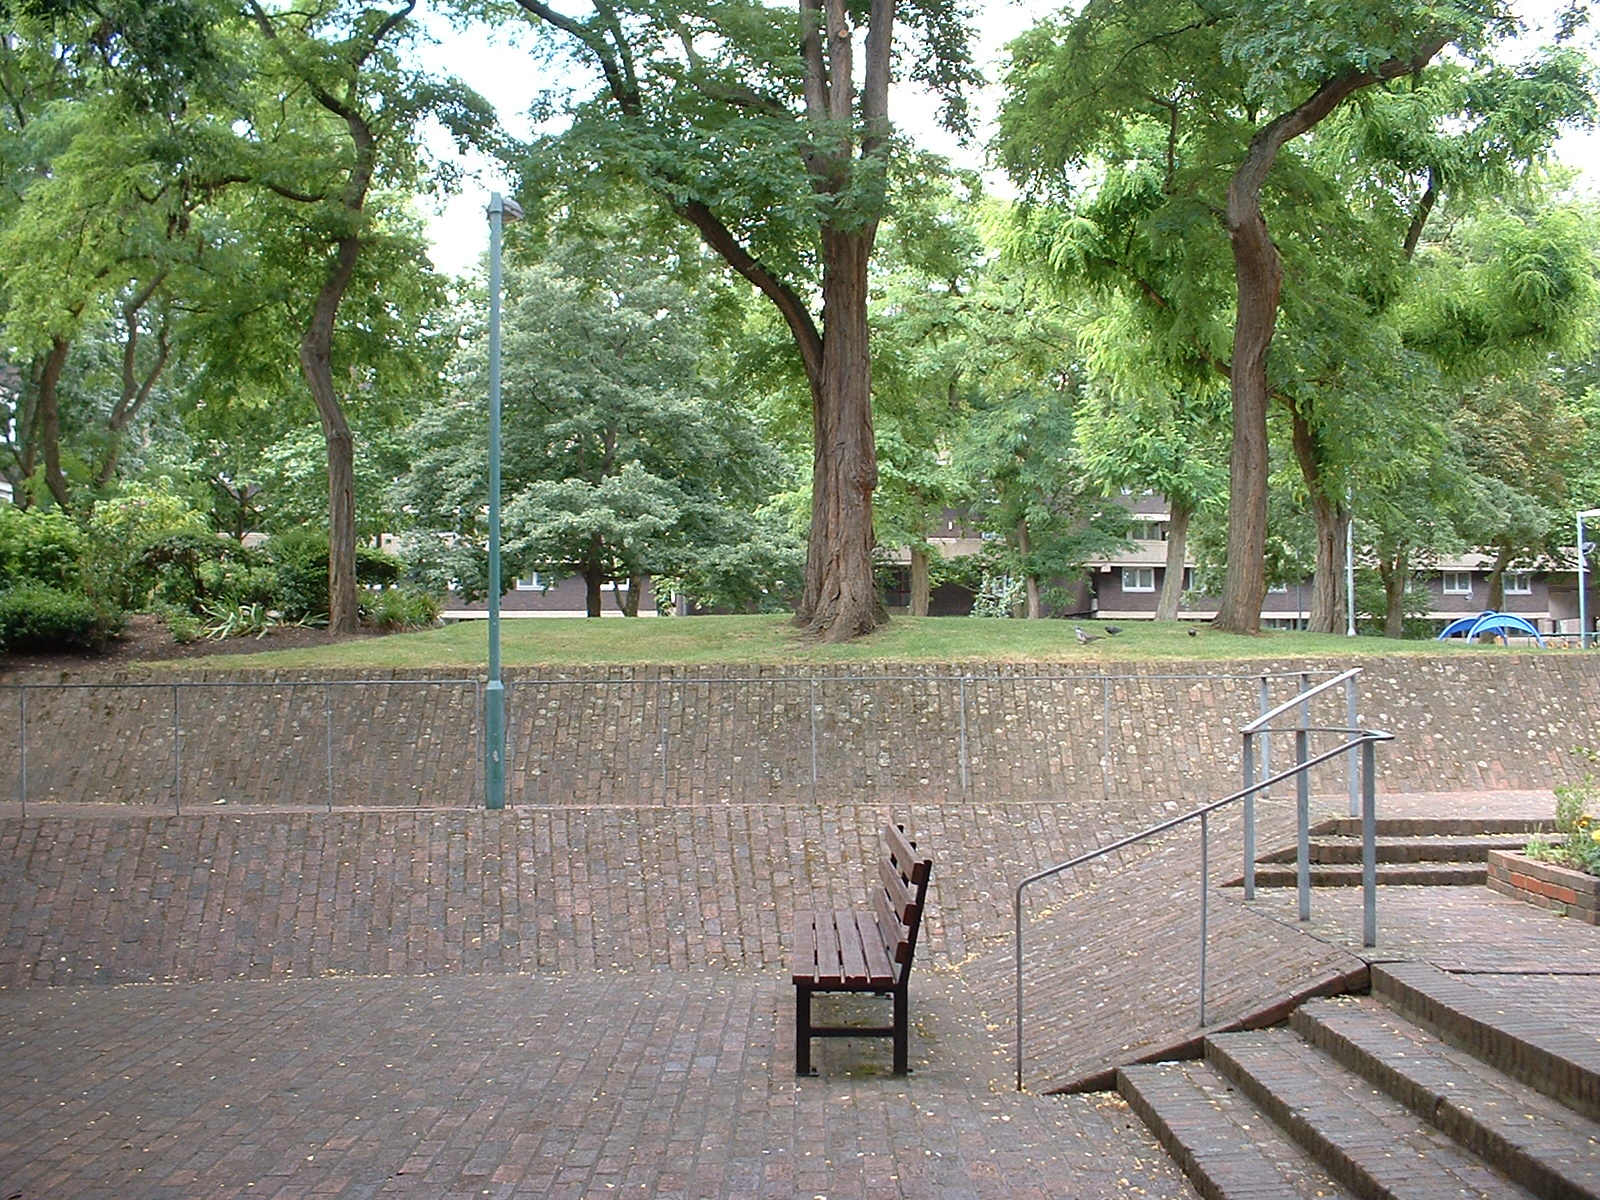 Sunken brick-paved square surrounded by large trees on the Brunel Estate in 2017